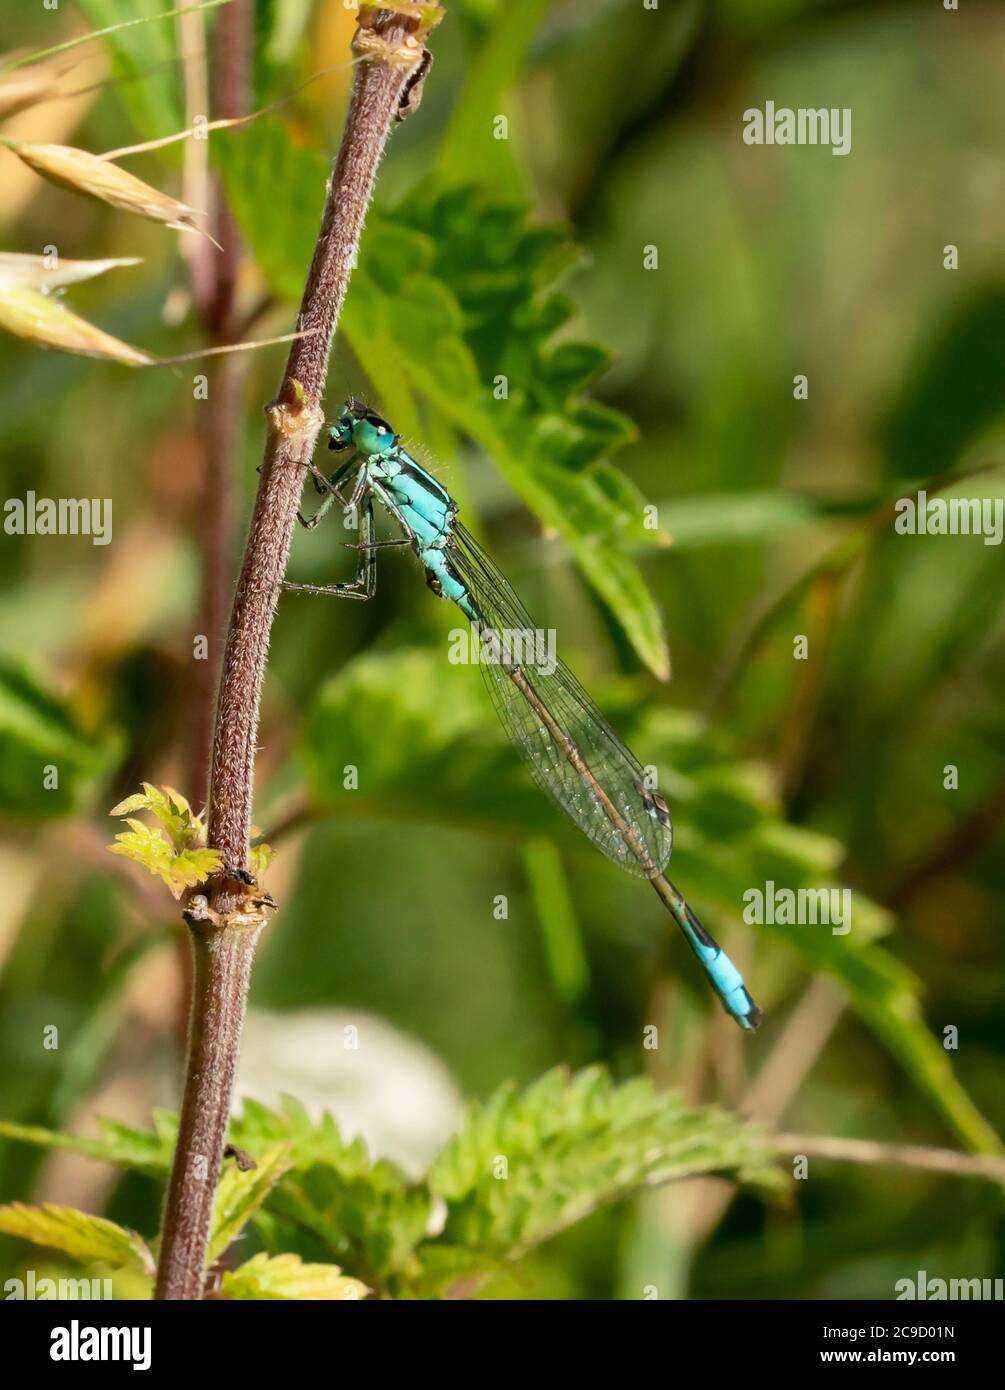 Perched male Blue tailed damselfly (Ischnura elegans), Oxfordshire Stock Photo